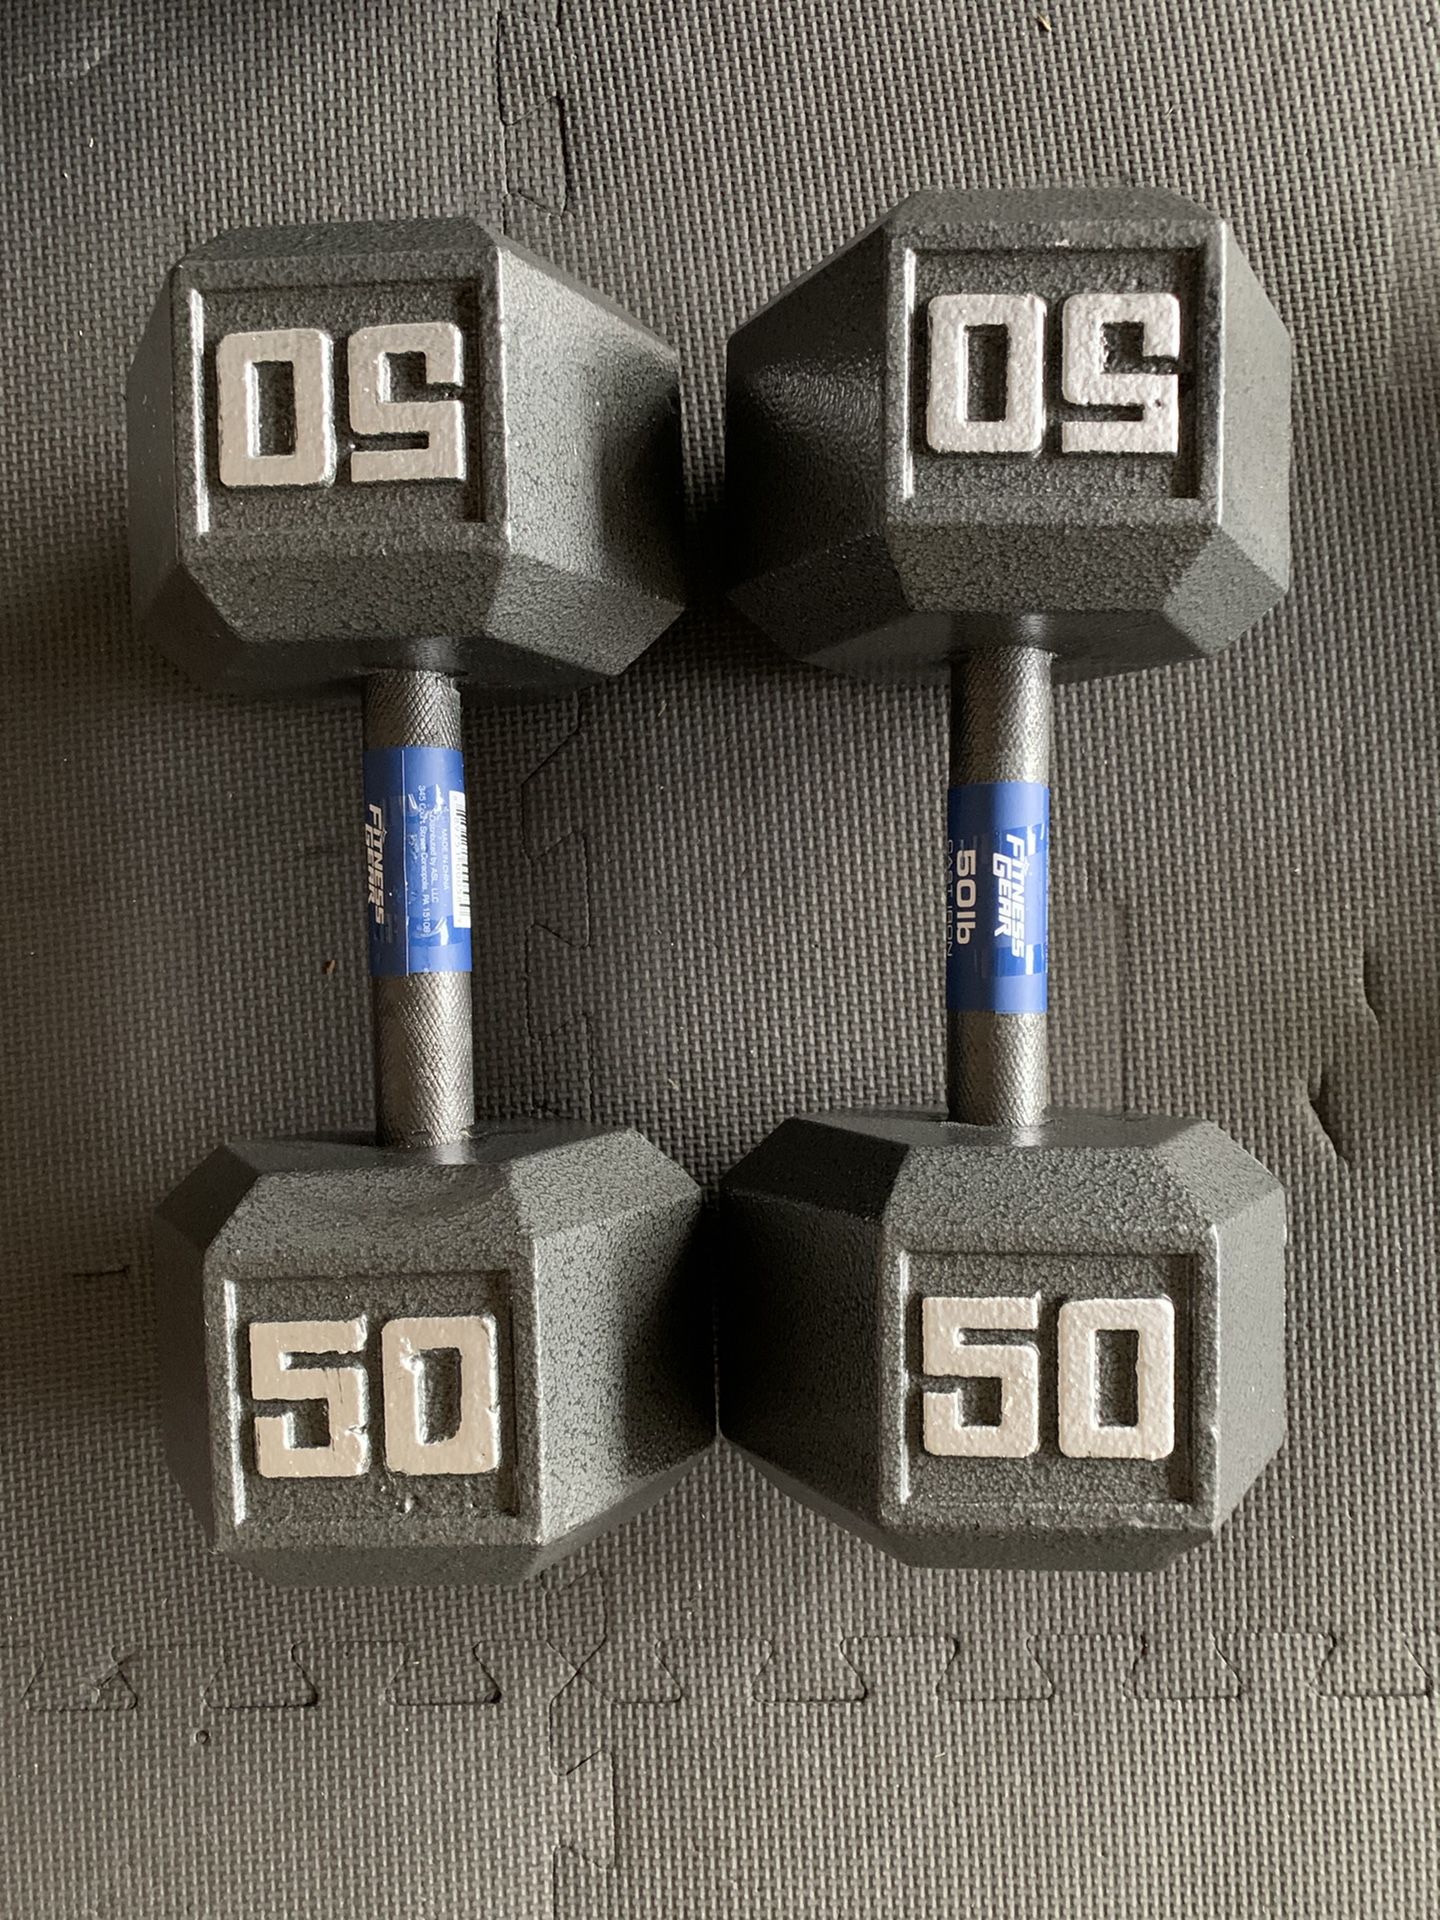 Brand New 50lb hex dumbbell weights! (Pair)